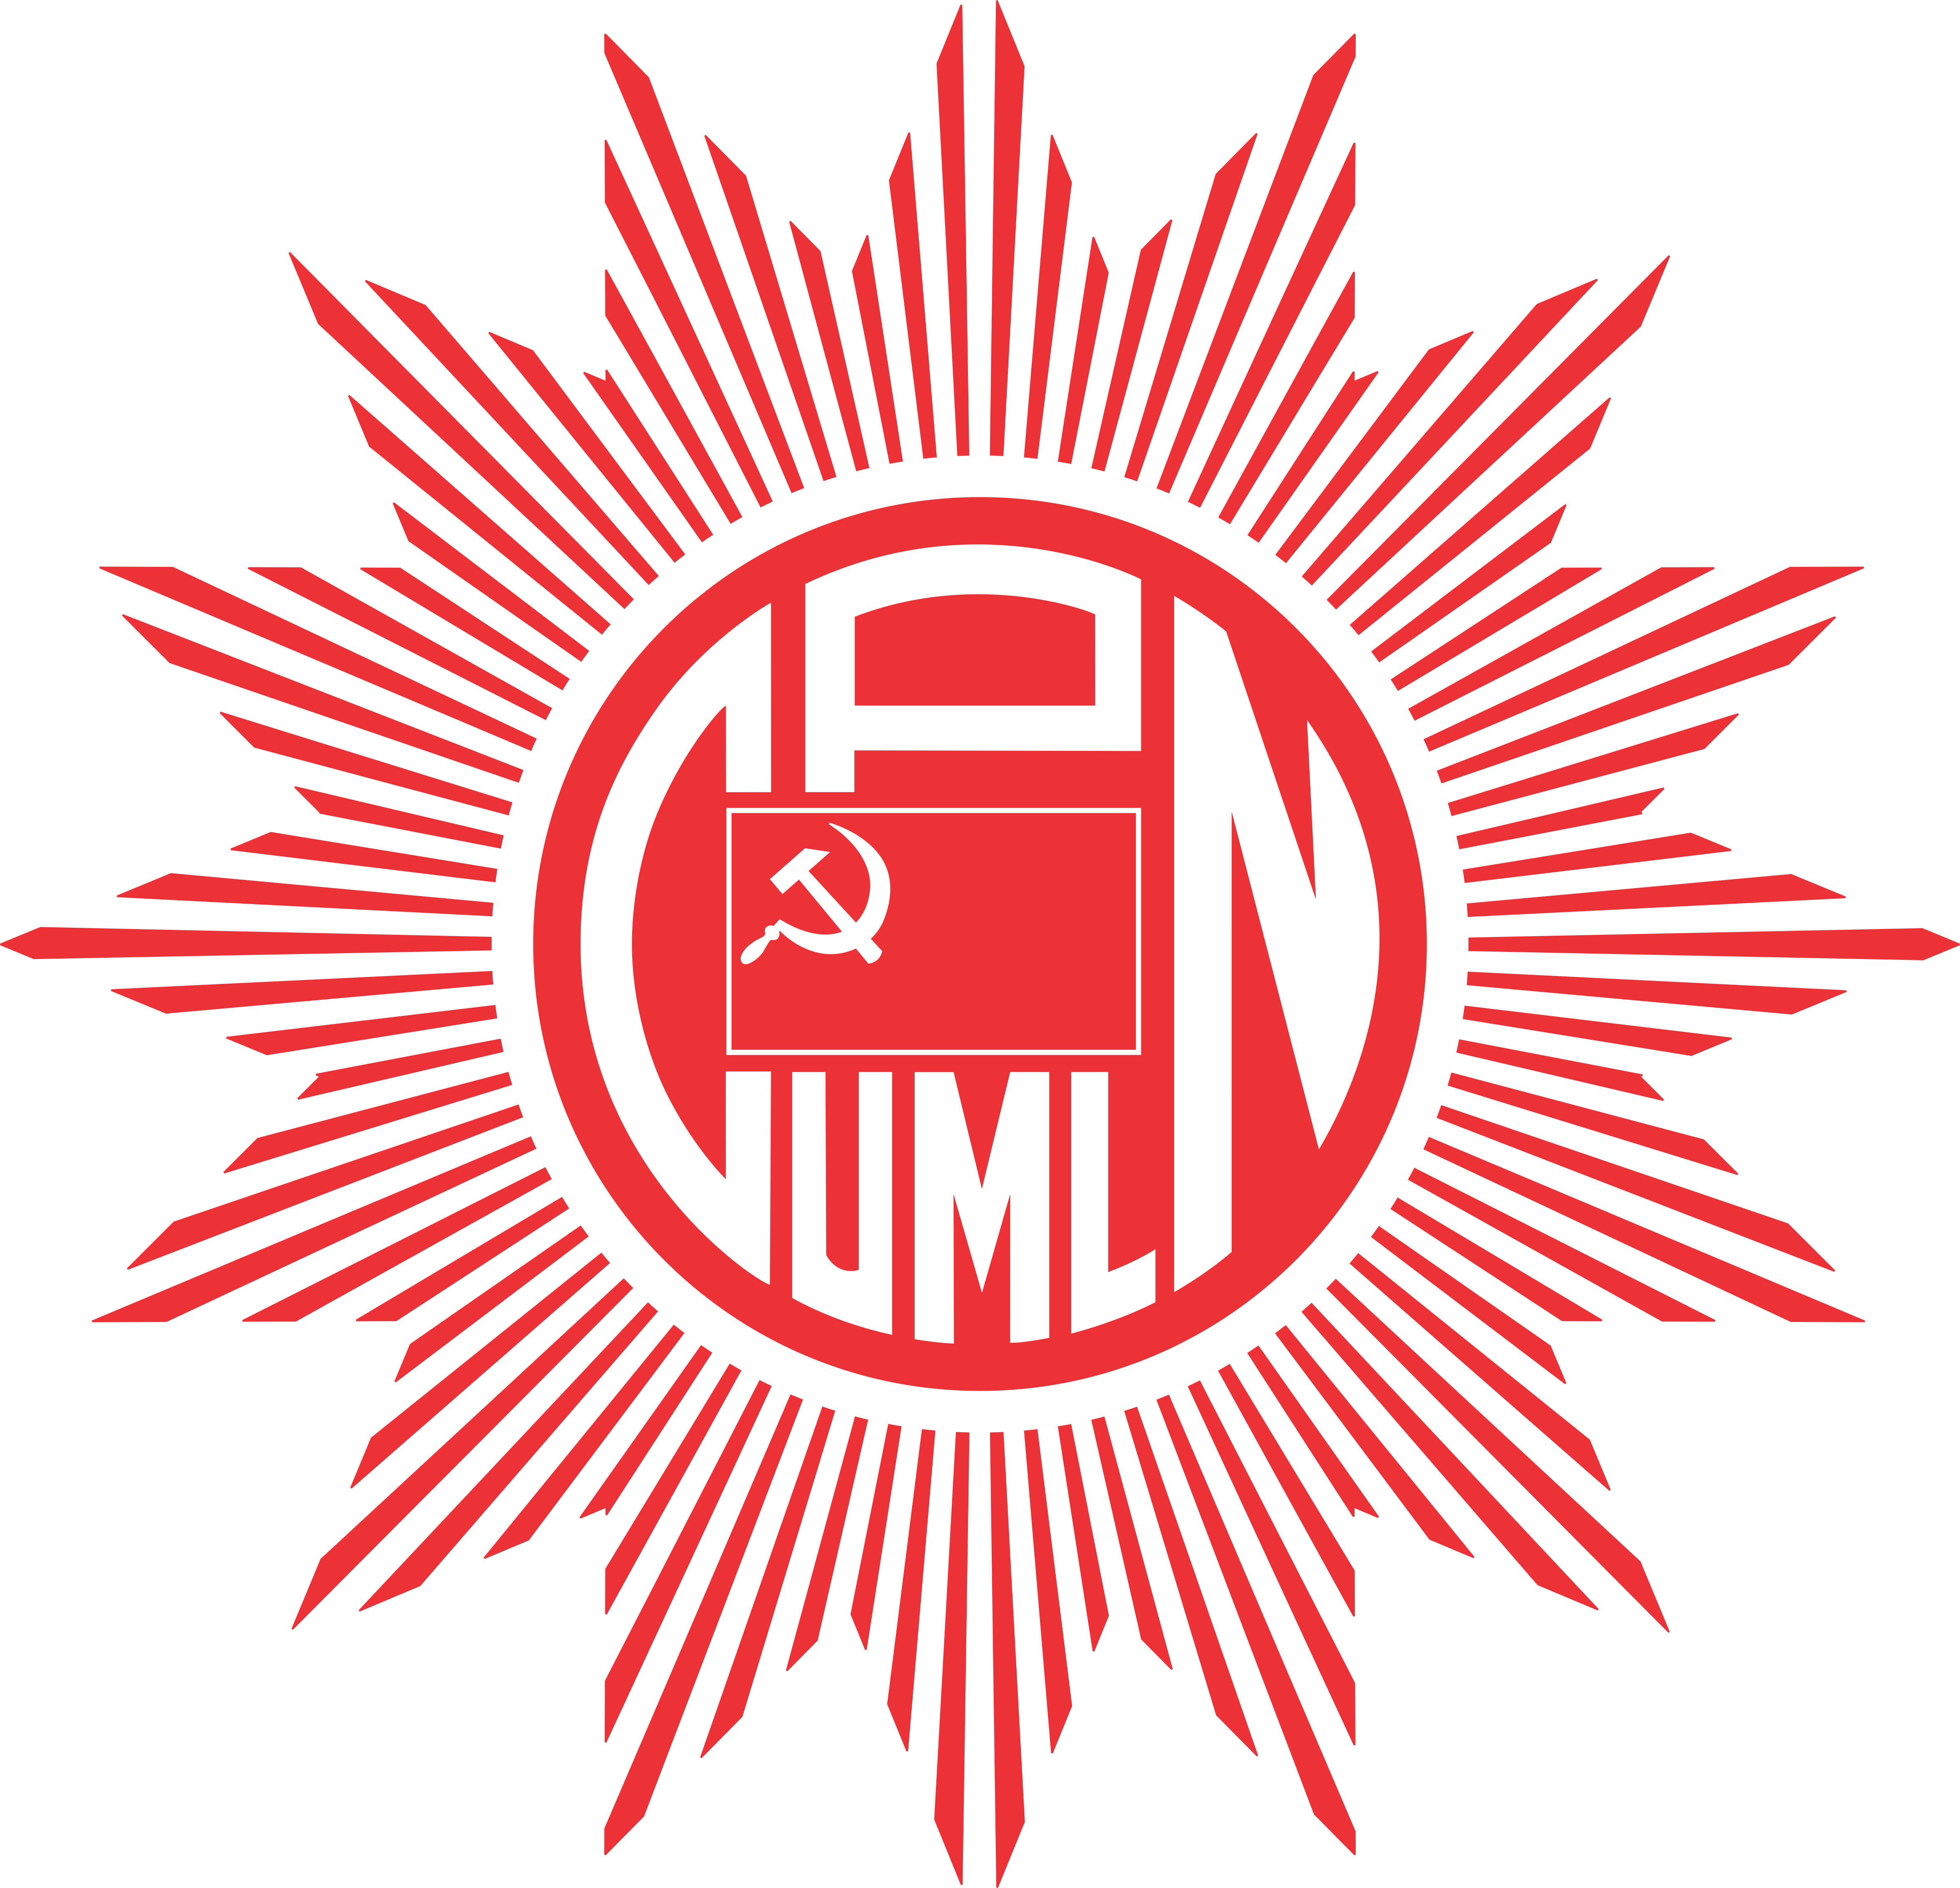 CPN Logo - File:Logo of CPN (UML).png - Wikimedia Commons